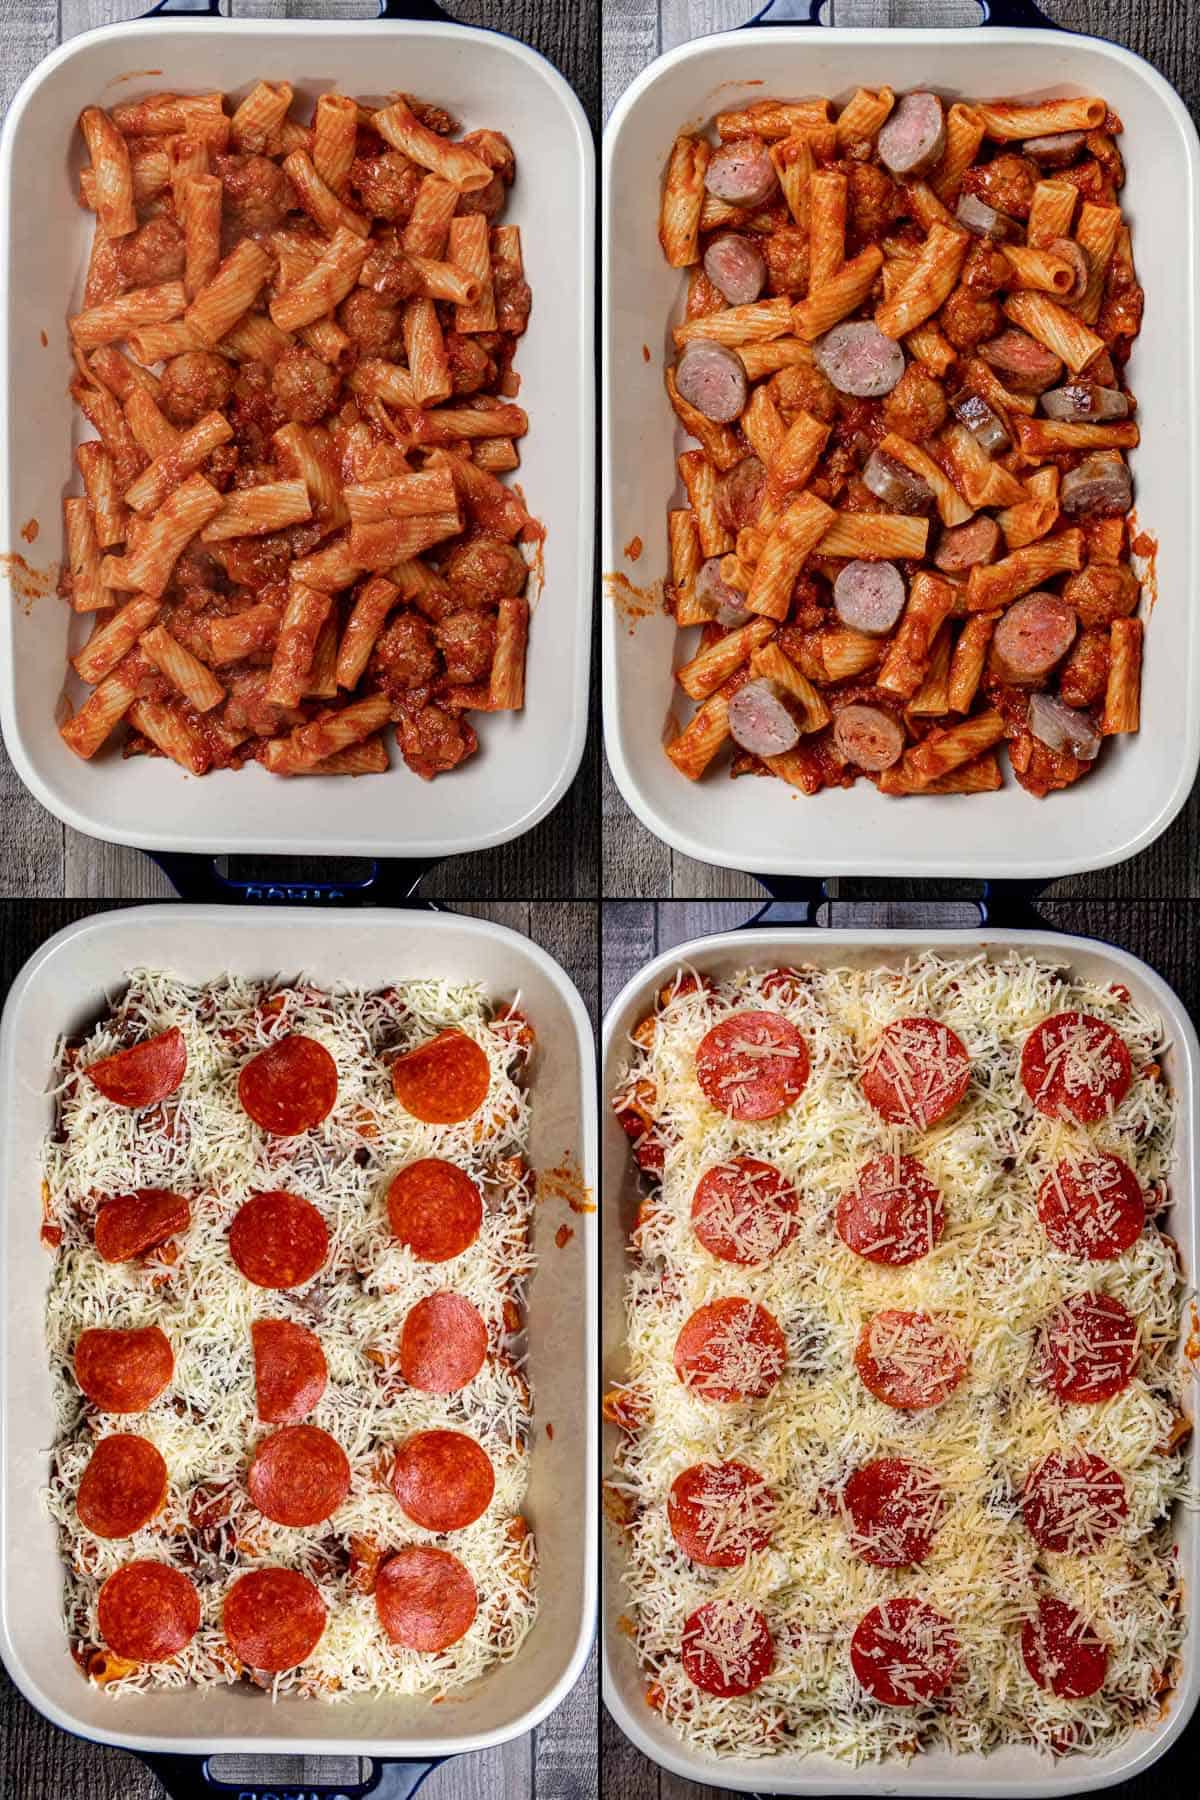 Four steps in layering baked rigatoni. Start with sauced pasta, add sausage slices, cover with mozzarella and pepperoni, repeat layer and finish with shredded parmesan cheese.